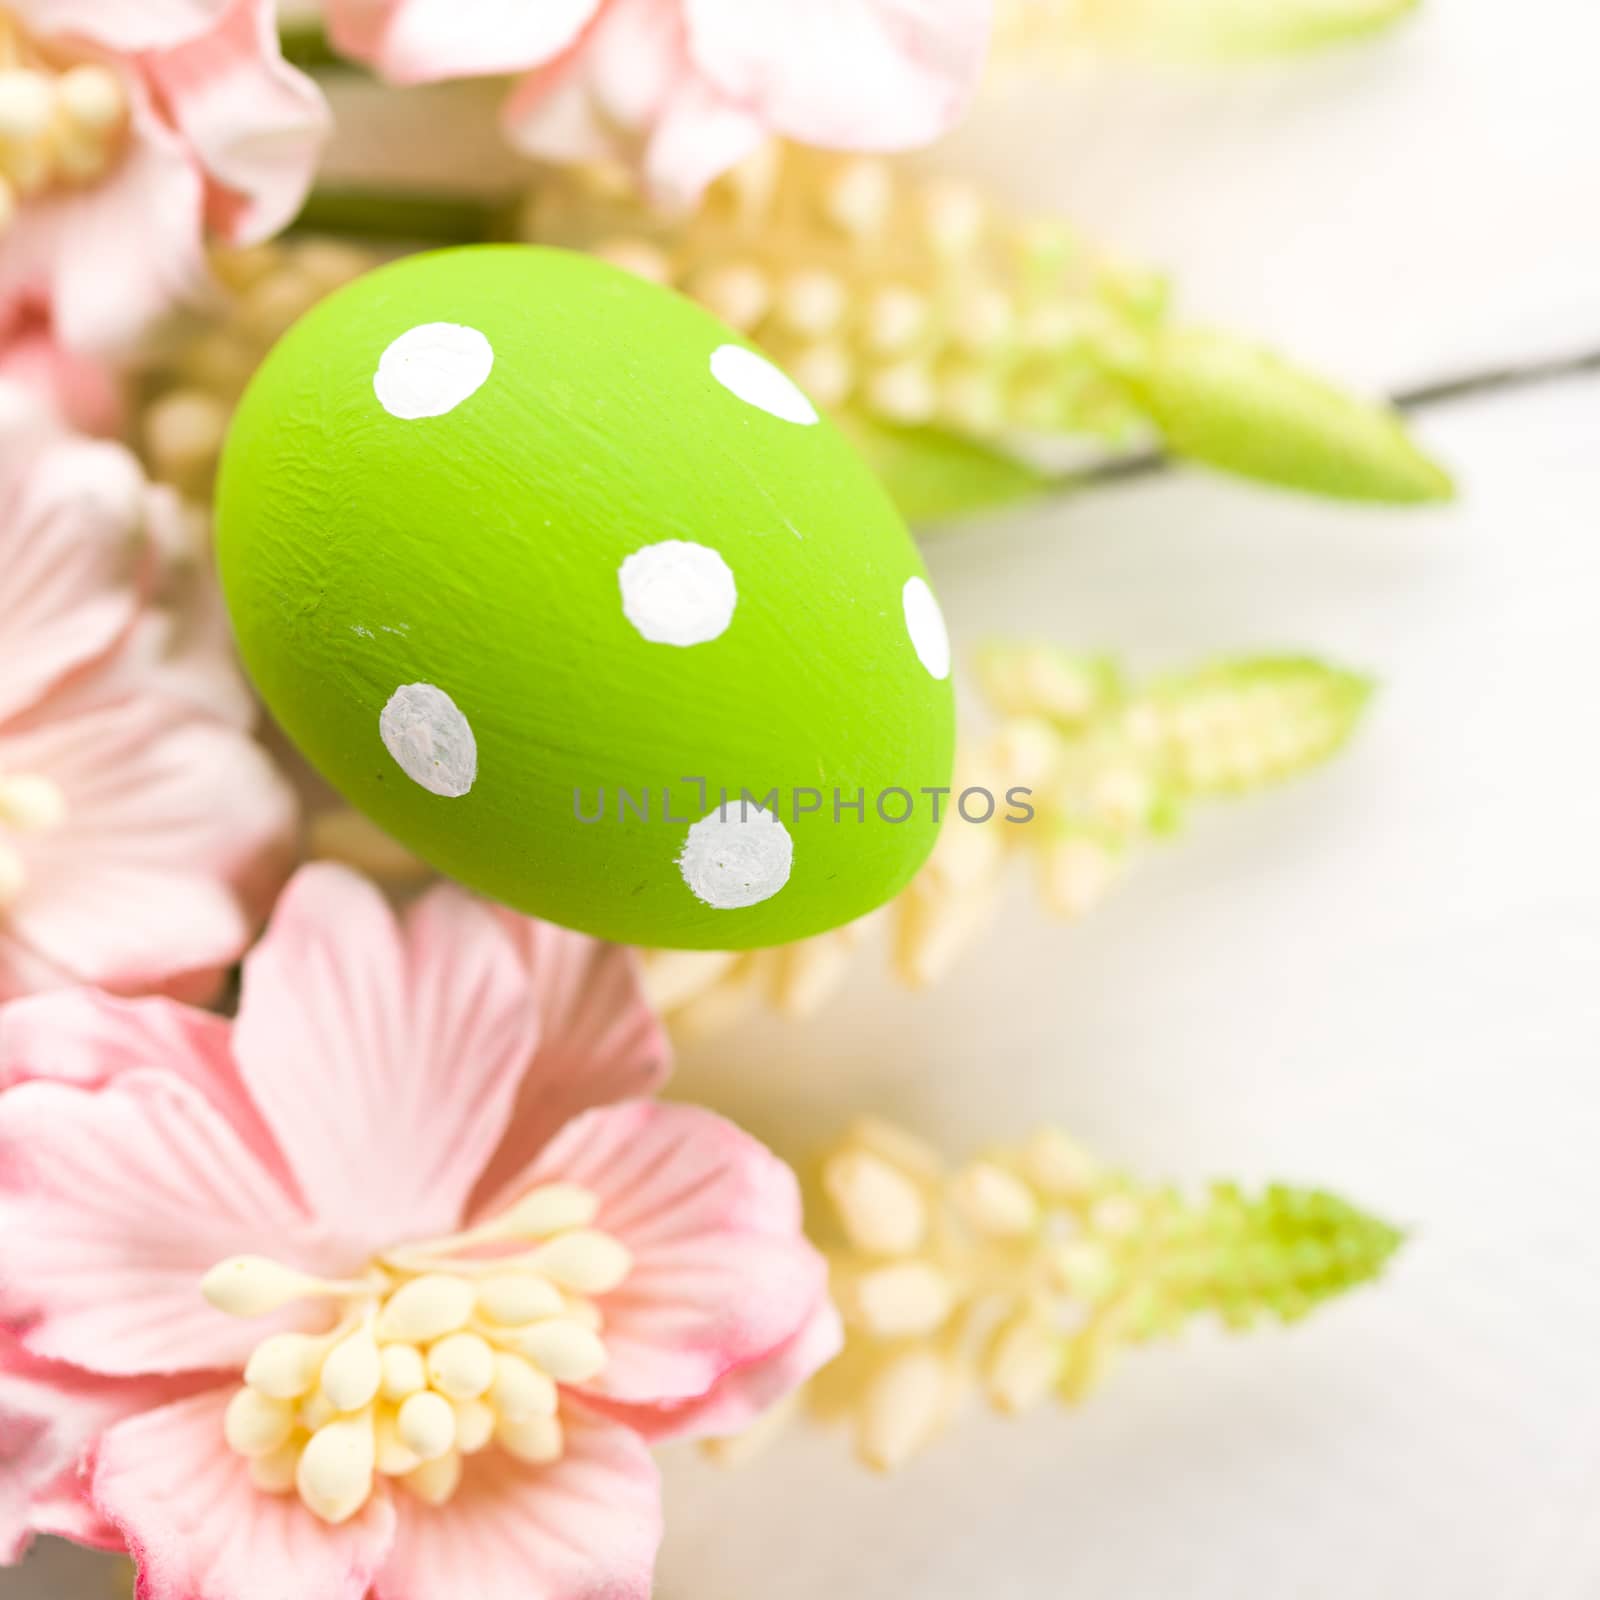 easter background with easter eggs and flowers on a old wooden table